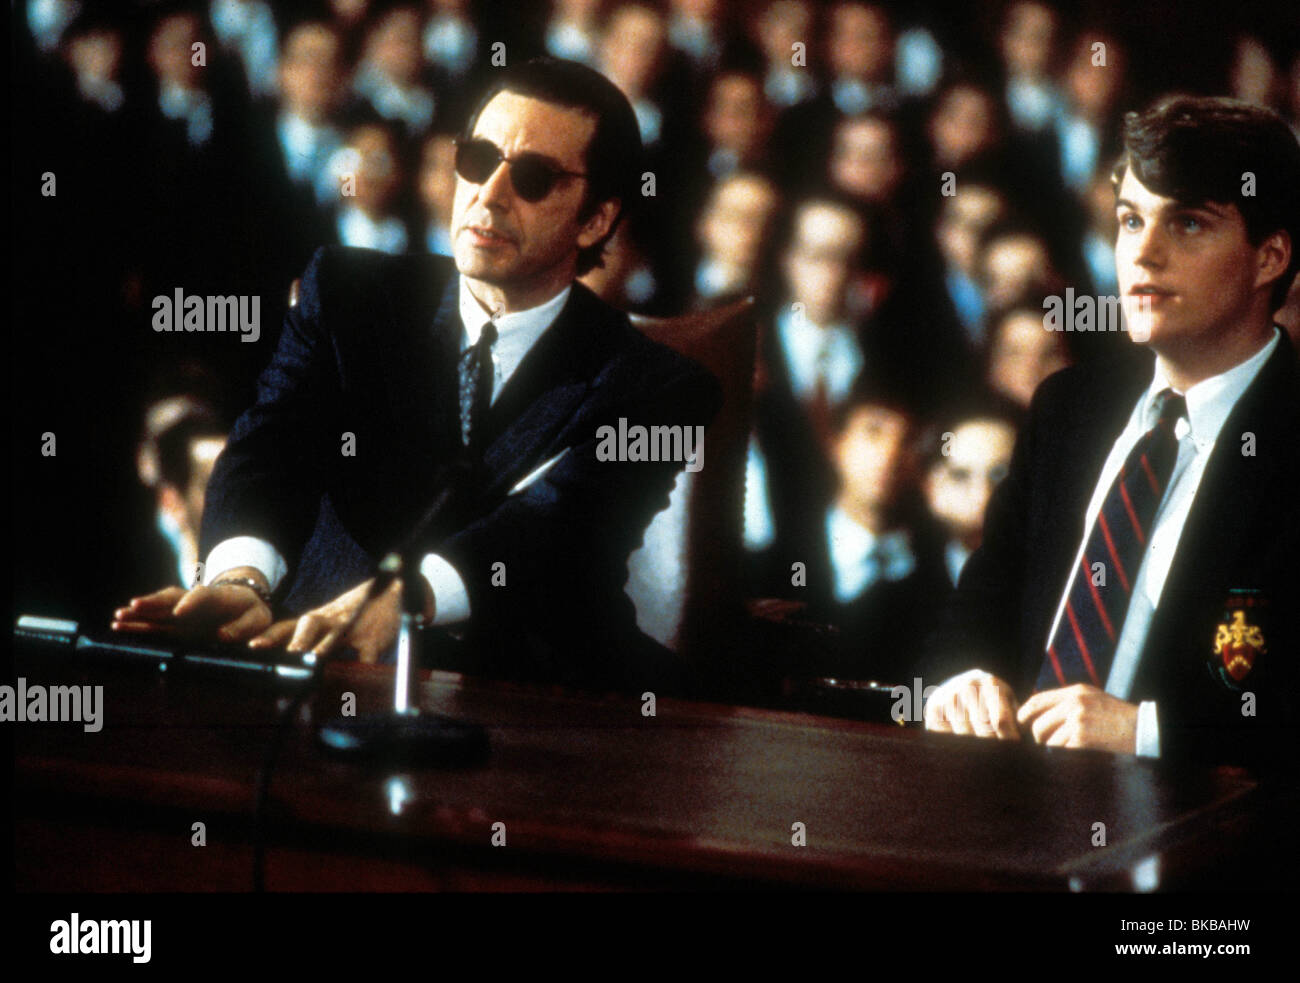 SCENT OF A WOMAN (1992) AL PACINO, CHRIS O'DONNELL SCW 069 Stock Photo